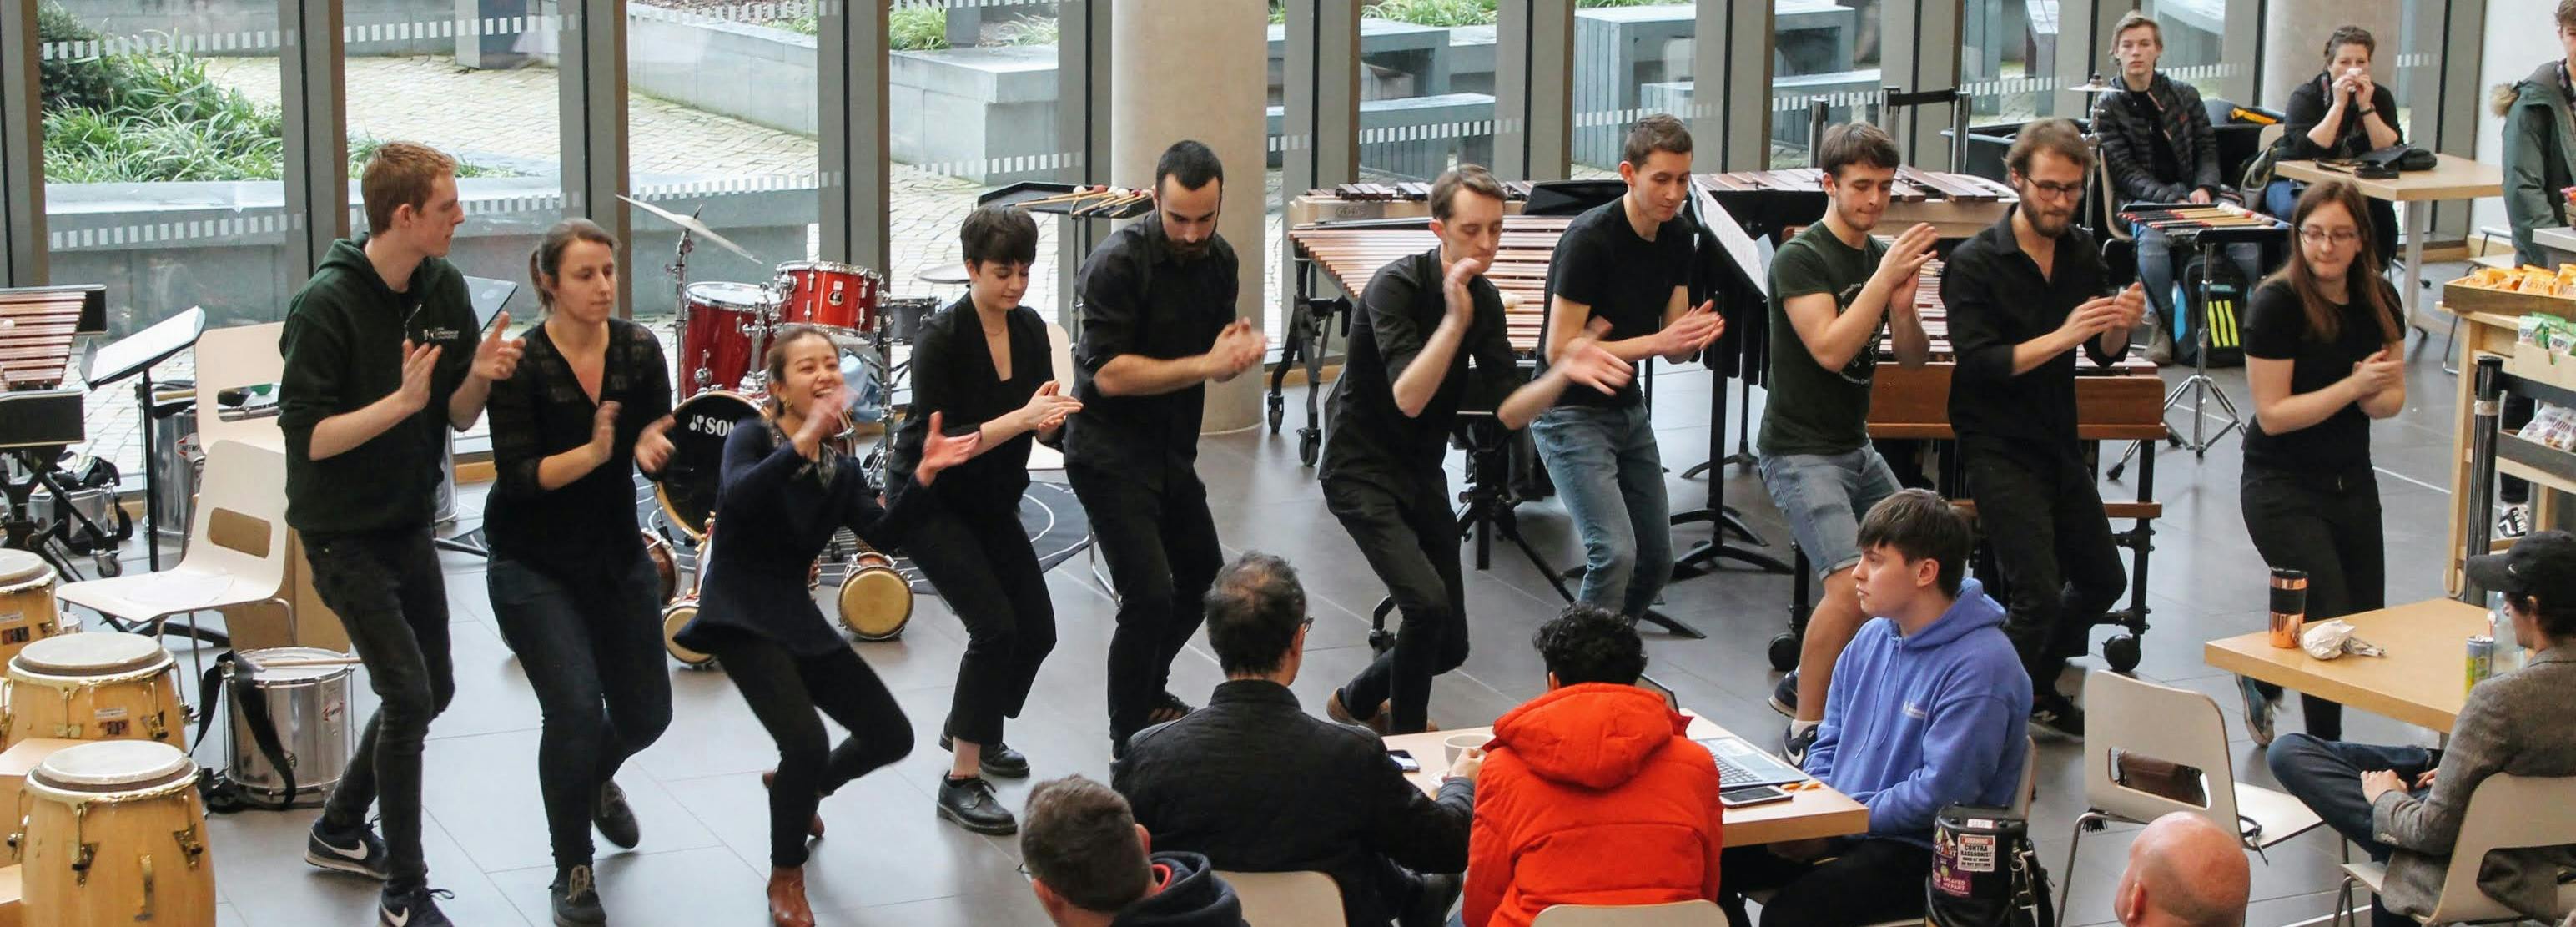 Percussion students performing at Open Day 2020. Photo by Toby Kearney